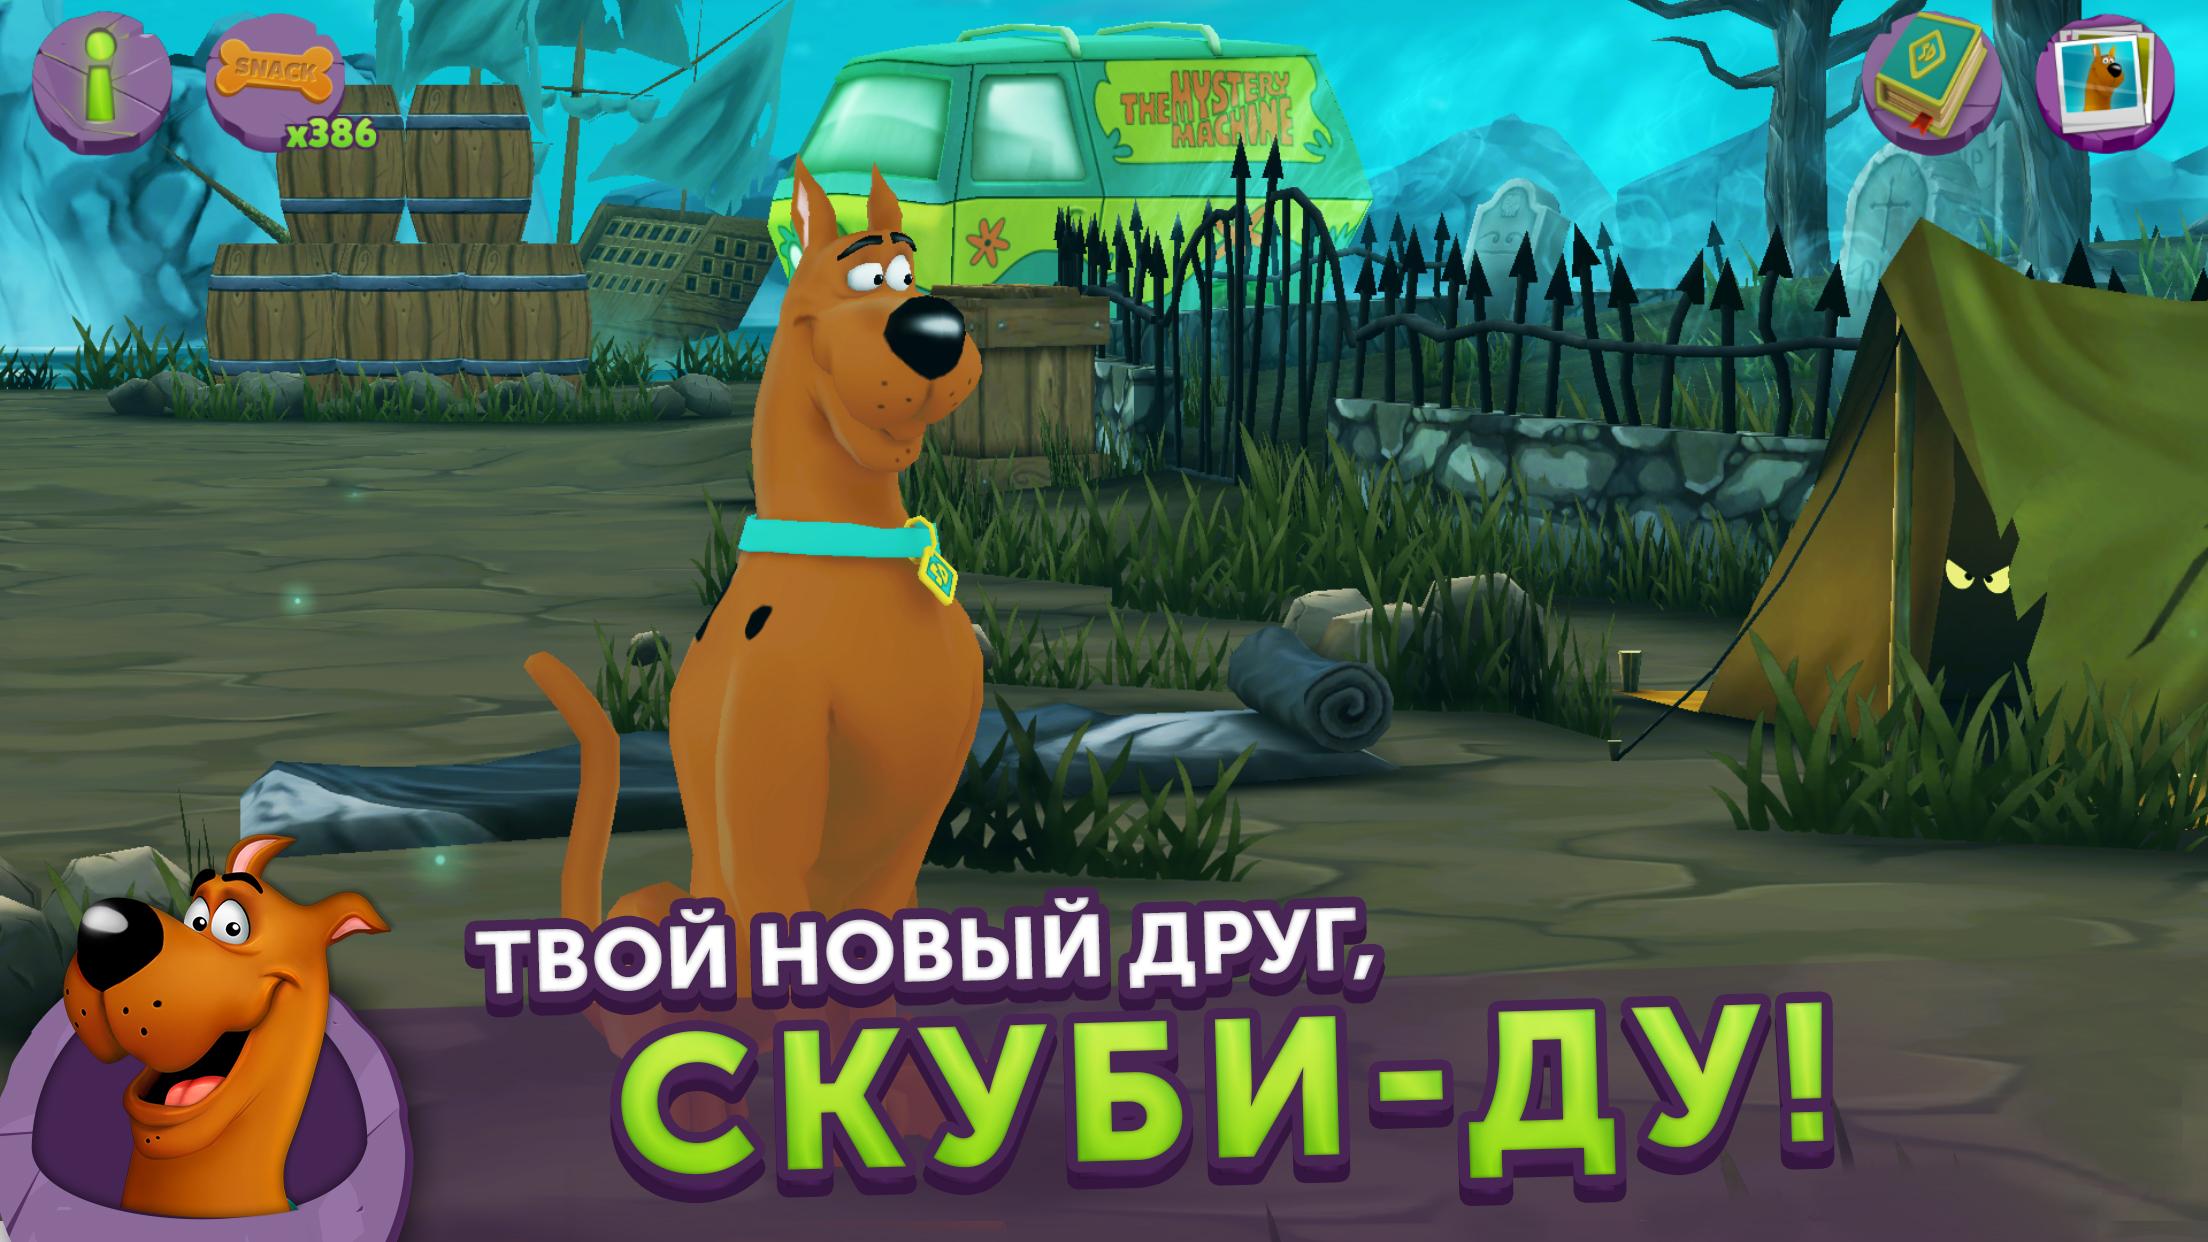 Android application My Friend Scooby-Doo! screenshort